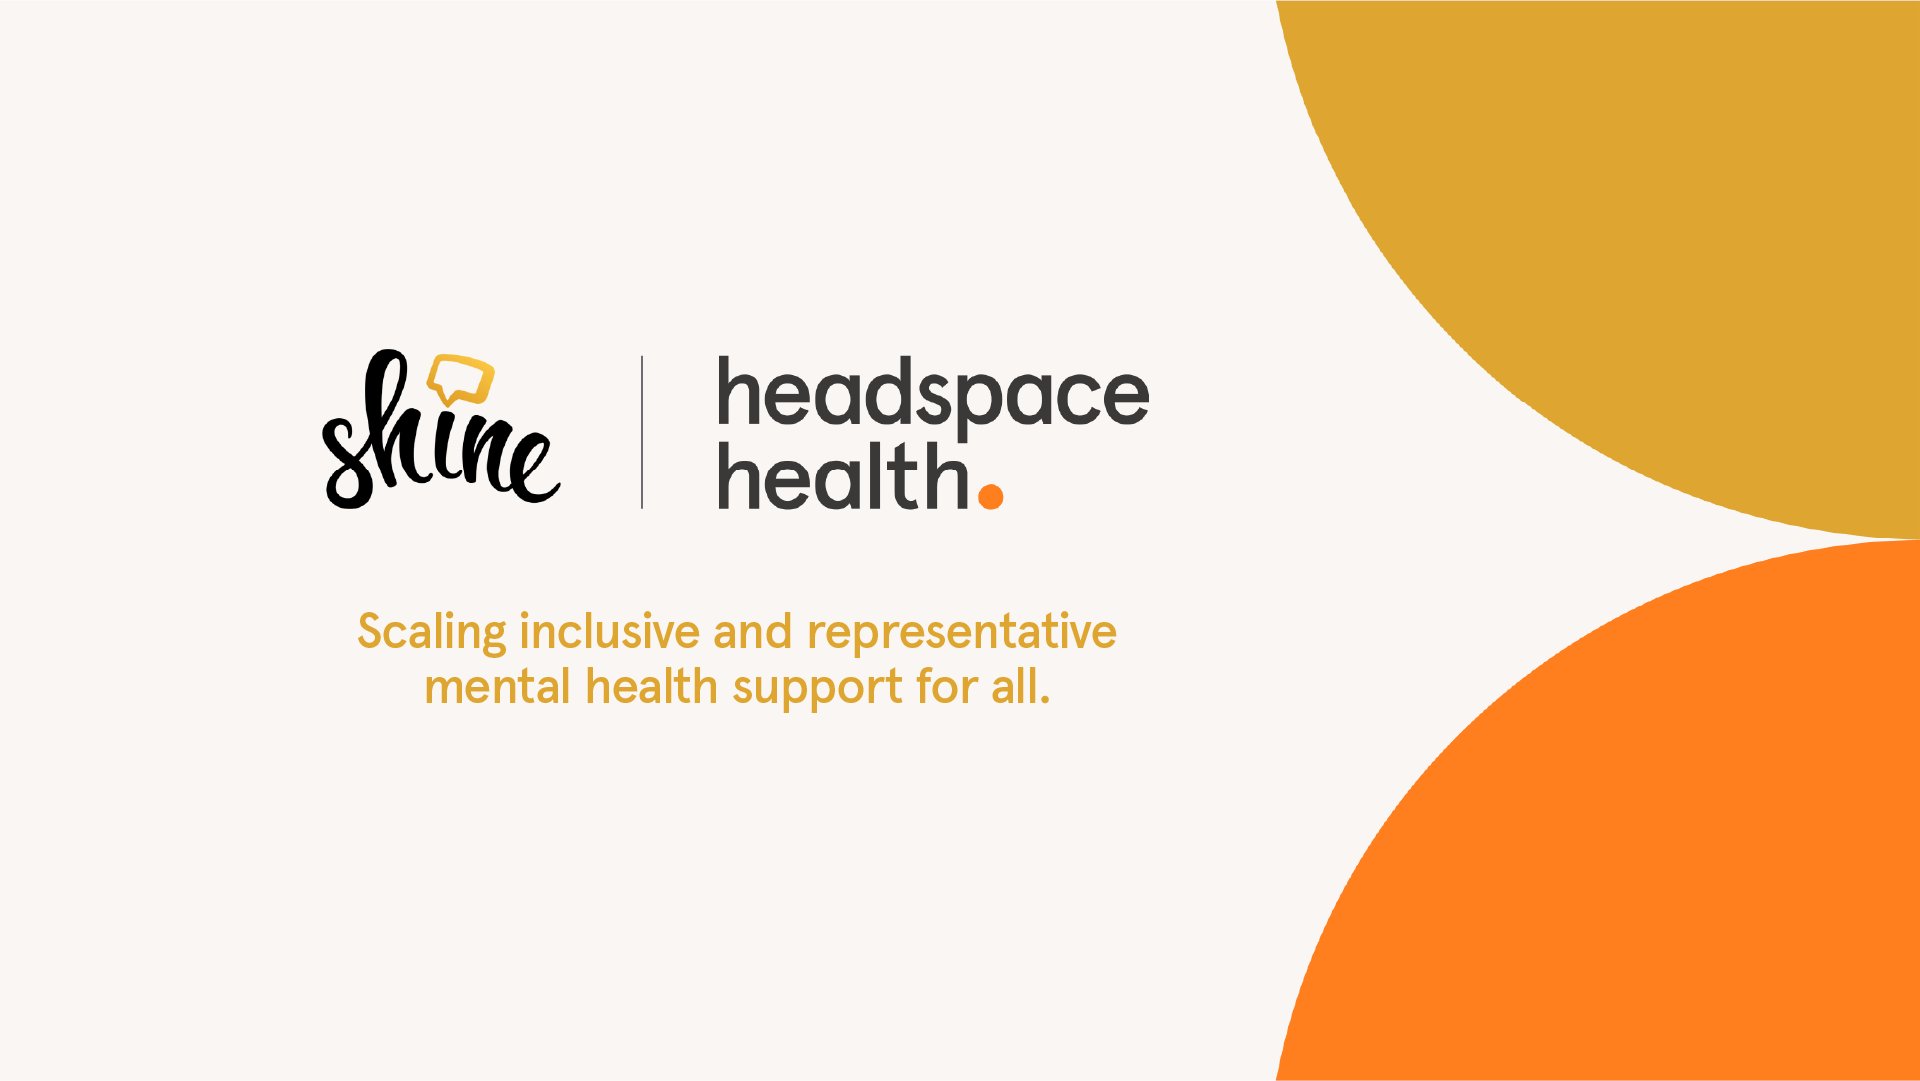 Shine is acquired by Headspace Health